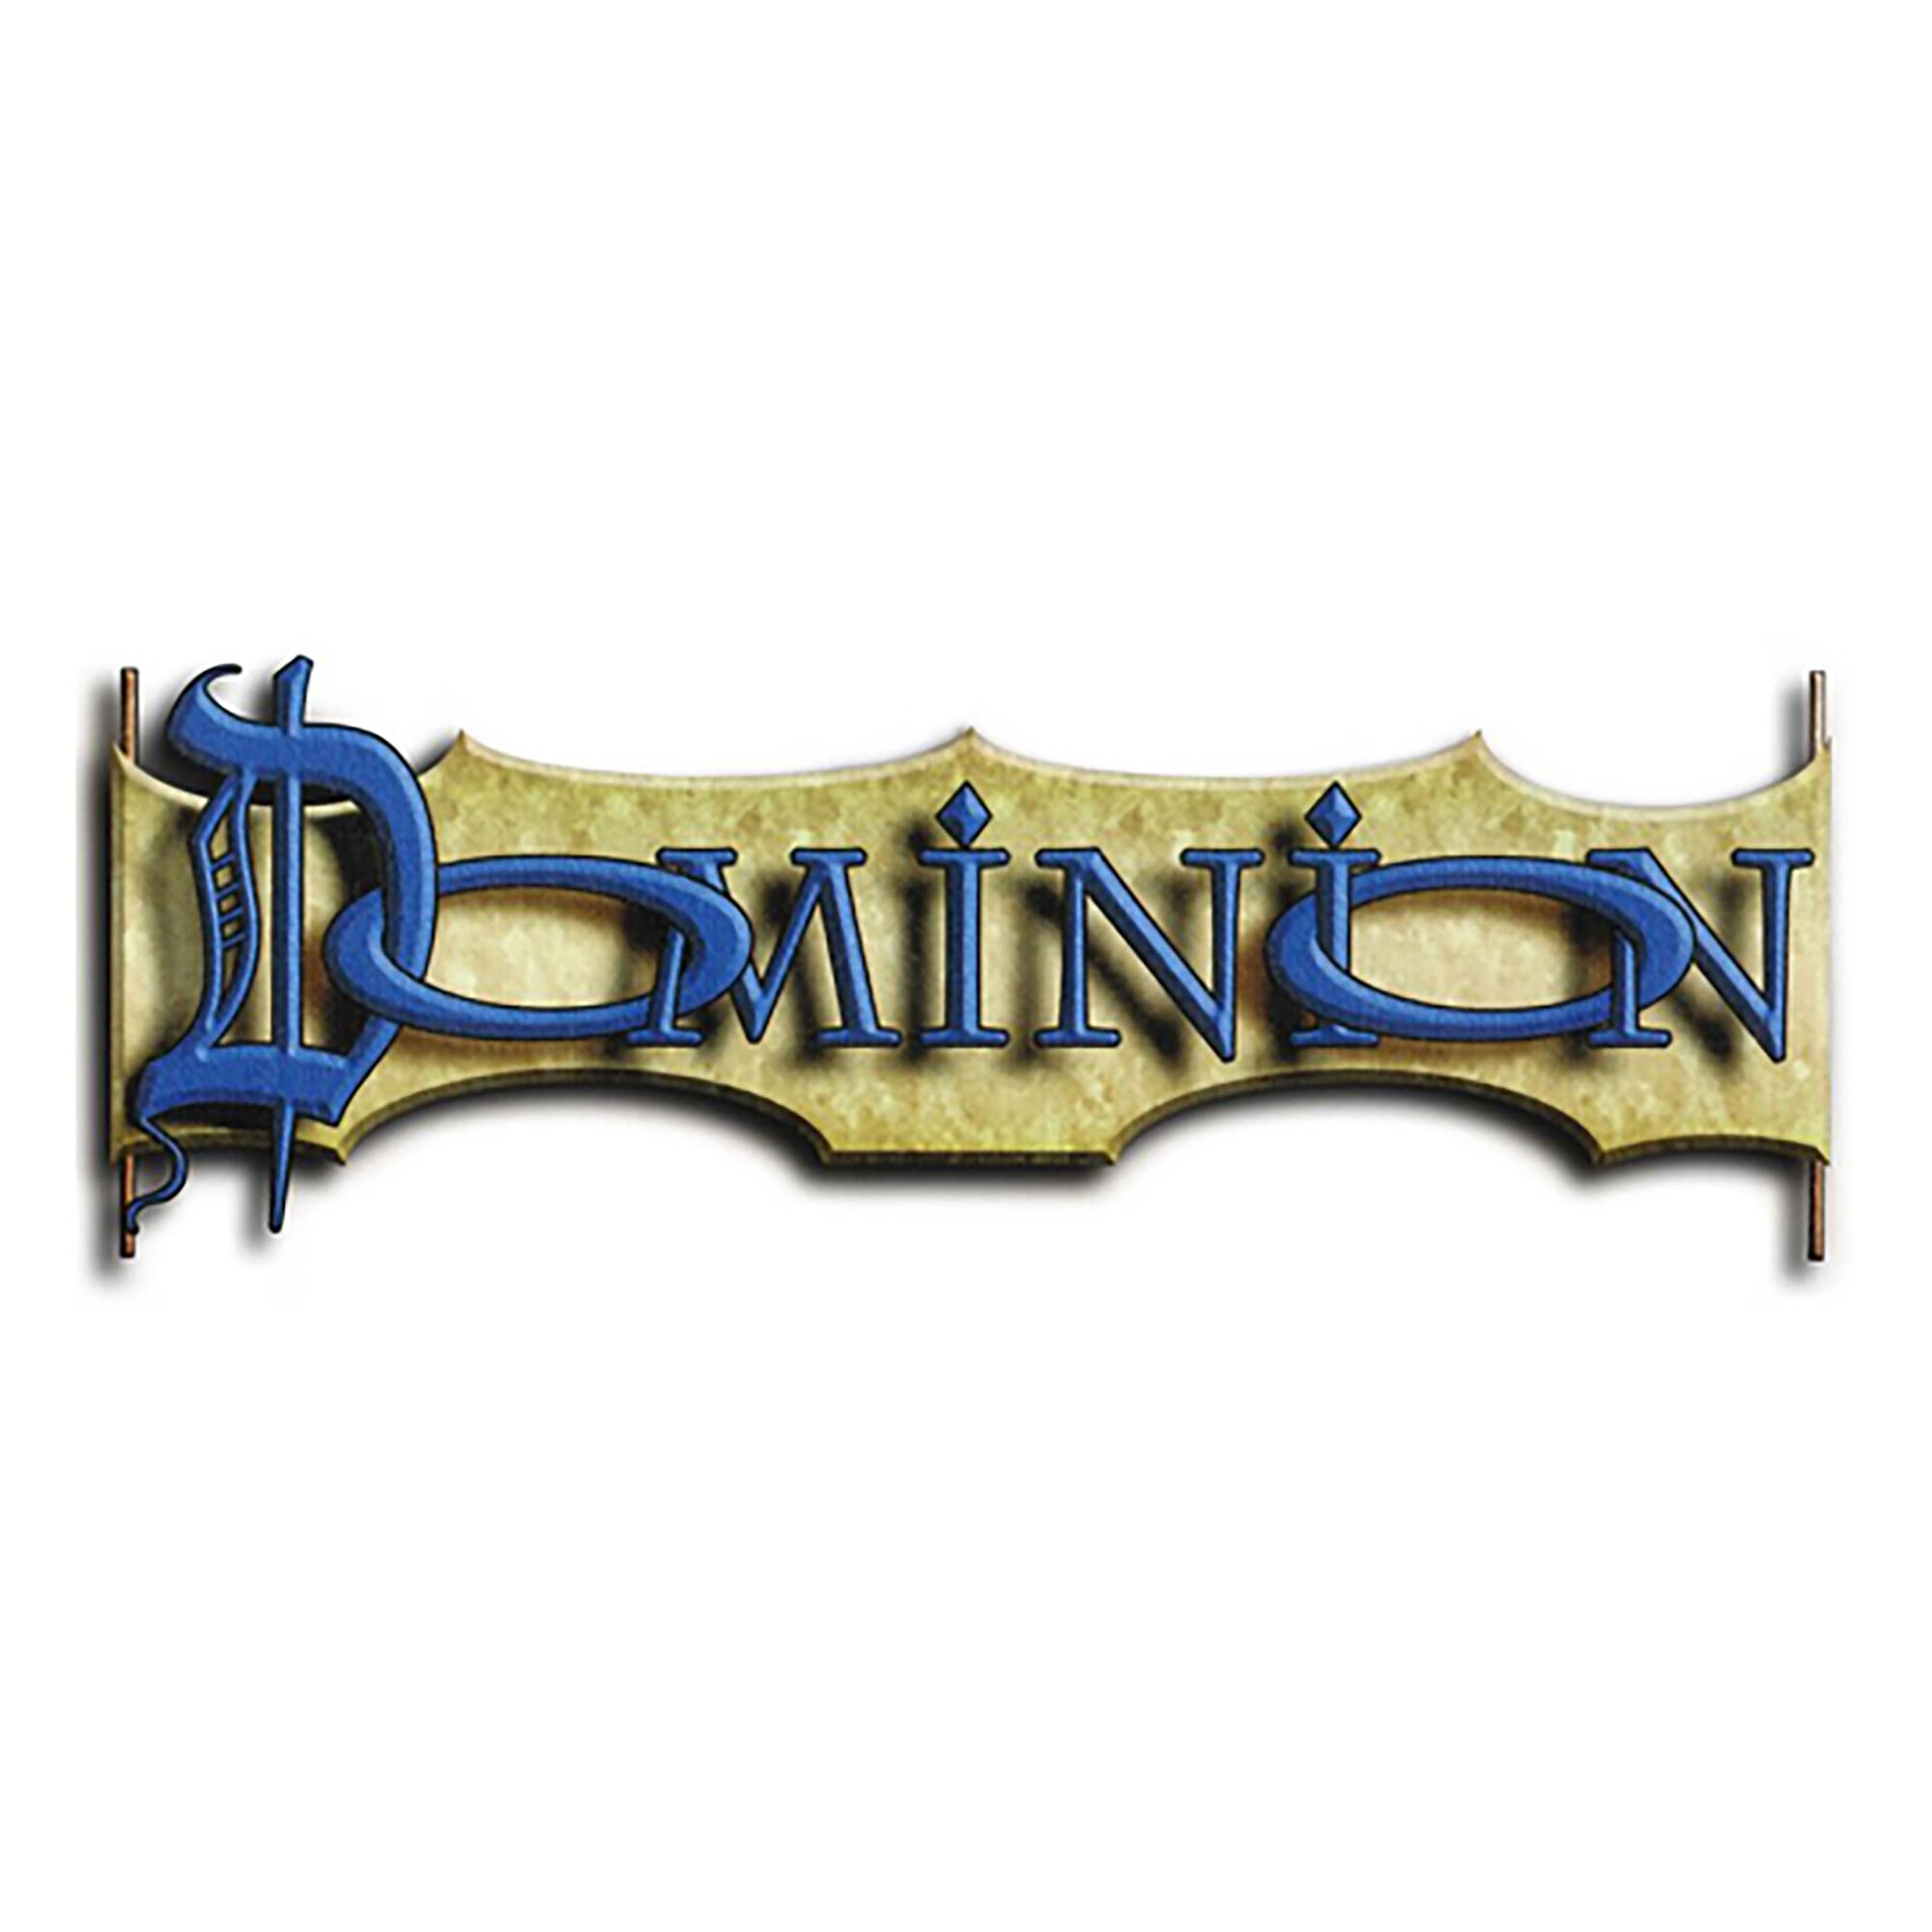 Rio Grande Games Dominion: Prosperity 2nd Edition Expansion - Ages 14+, 2-4 Players, 30 Mins (RIO622)